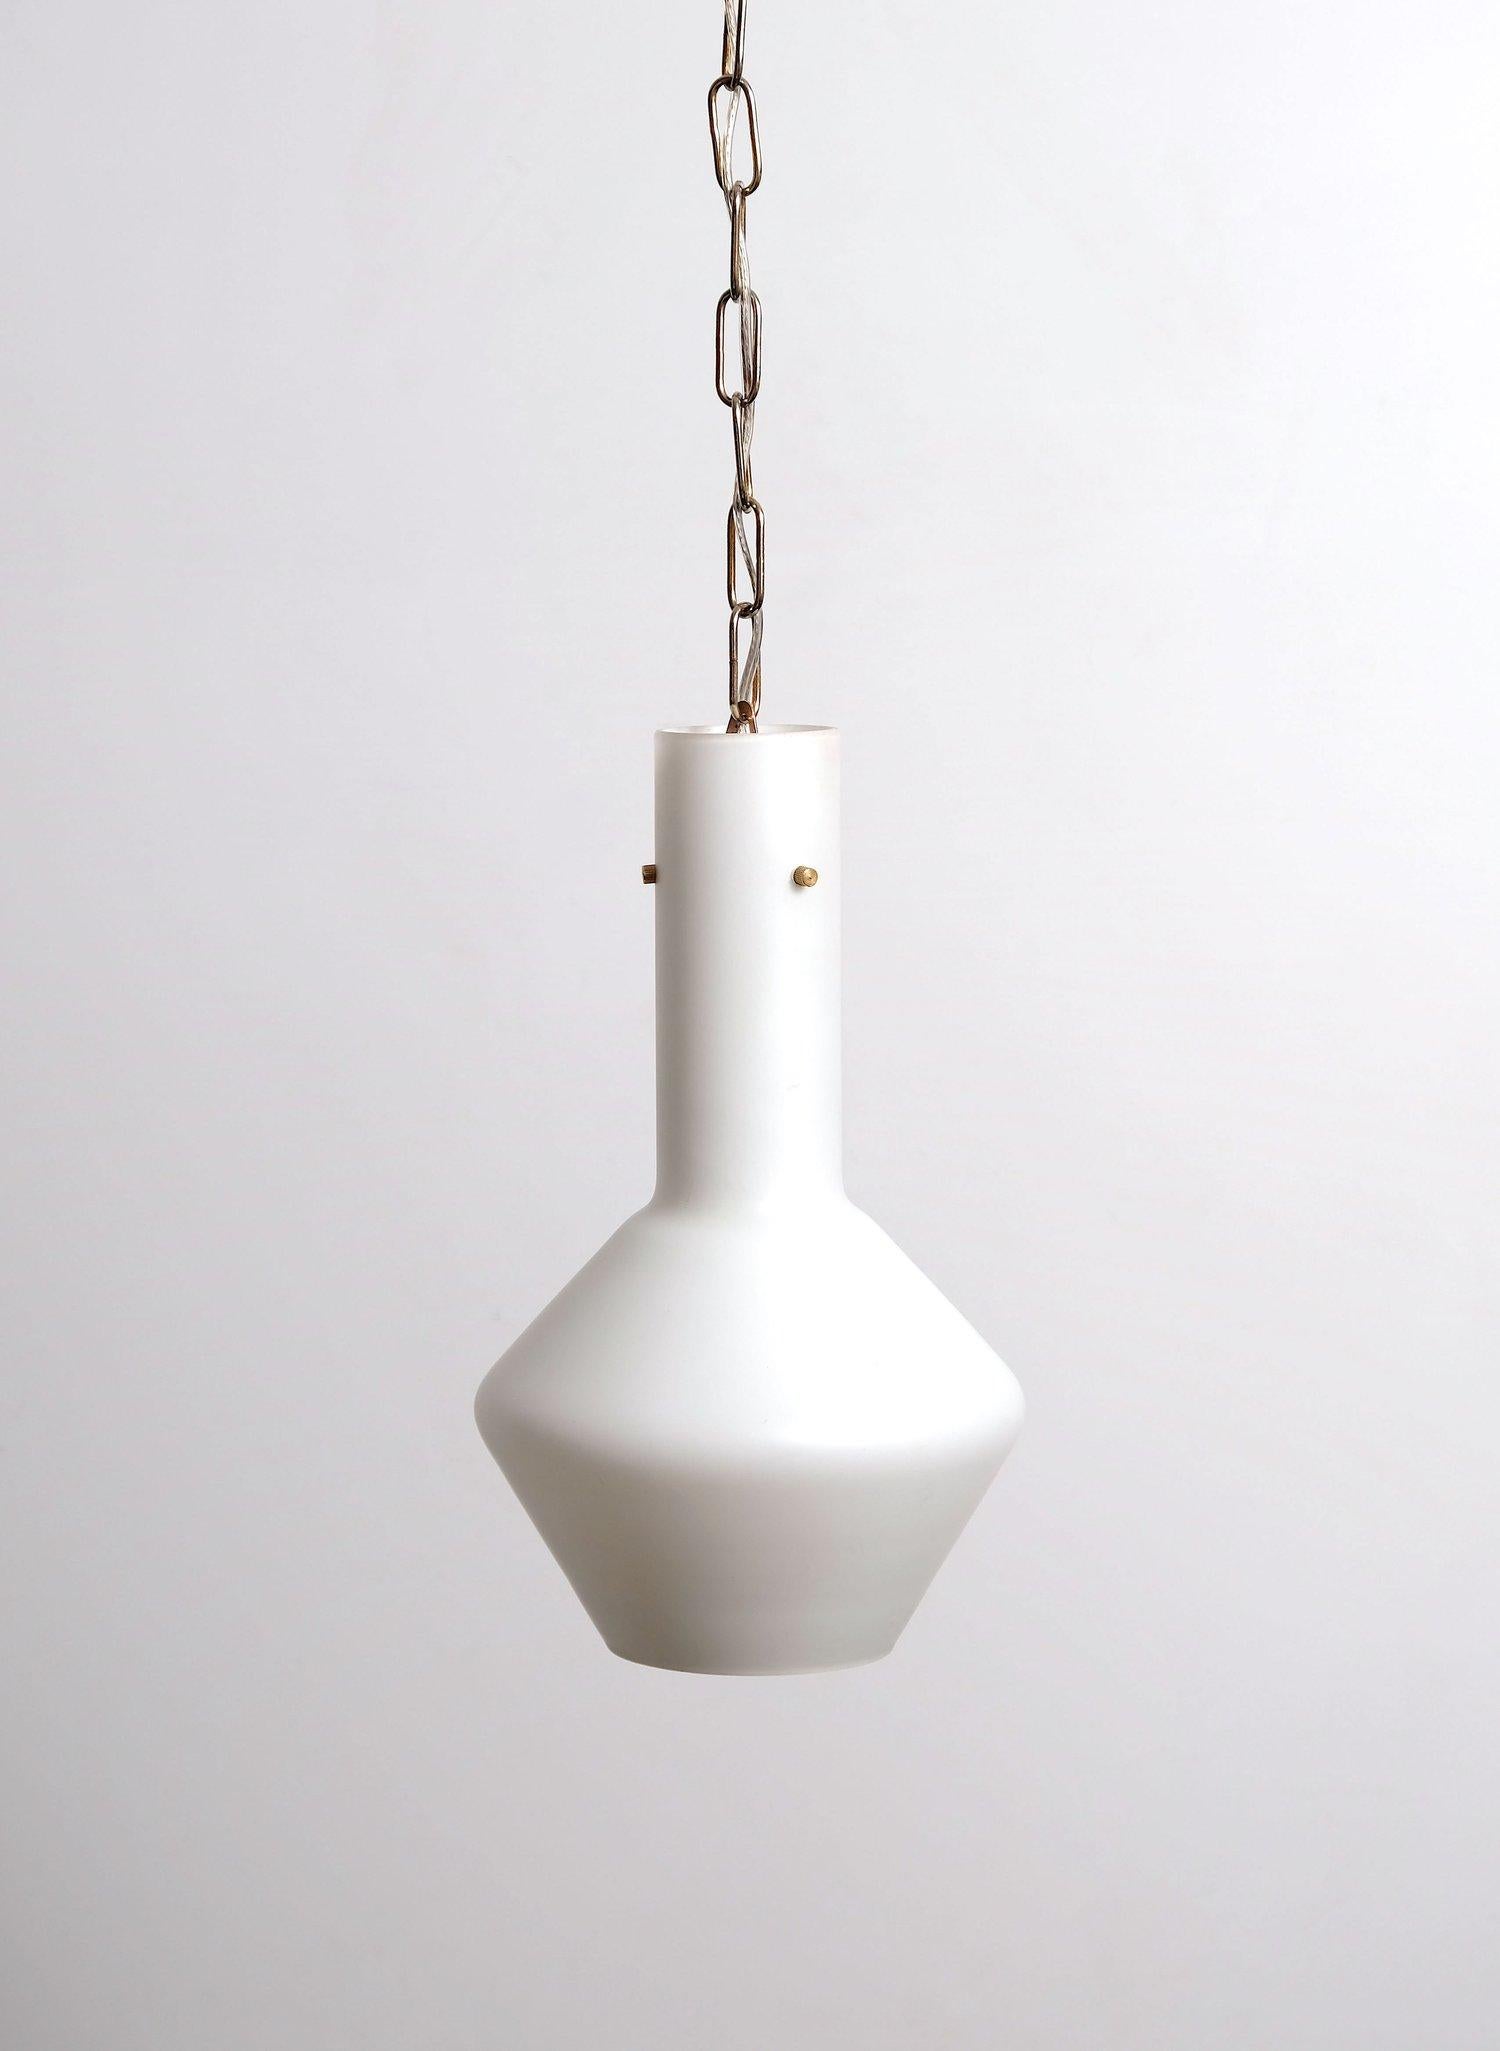 Mid century Italian opaline cased glass pendant. Brass fittings, worn brass-on-steel plated chain and canopy. 40-60 watts max G-12 candelabra incandescent bulbs recommended or higher if LED/CFL.

CREATOR: unknown

PERIOD: 1950-1959

COUNTRY OF